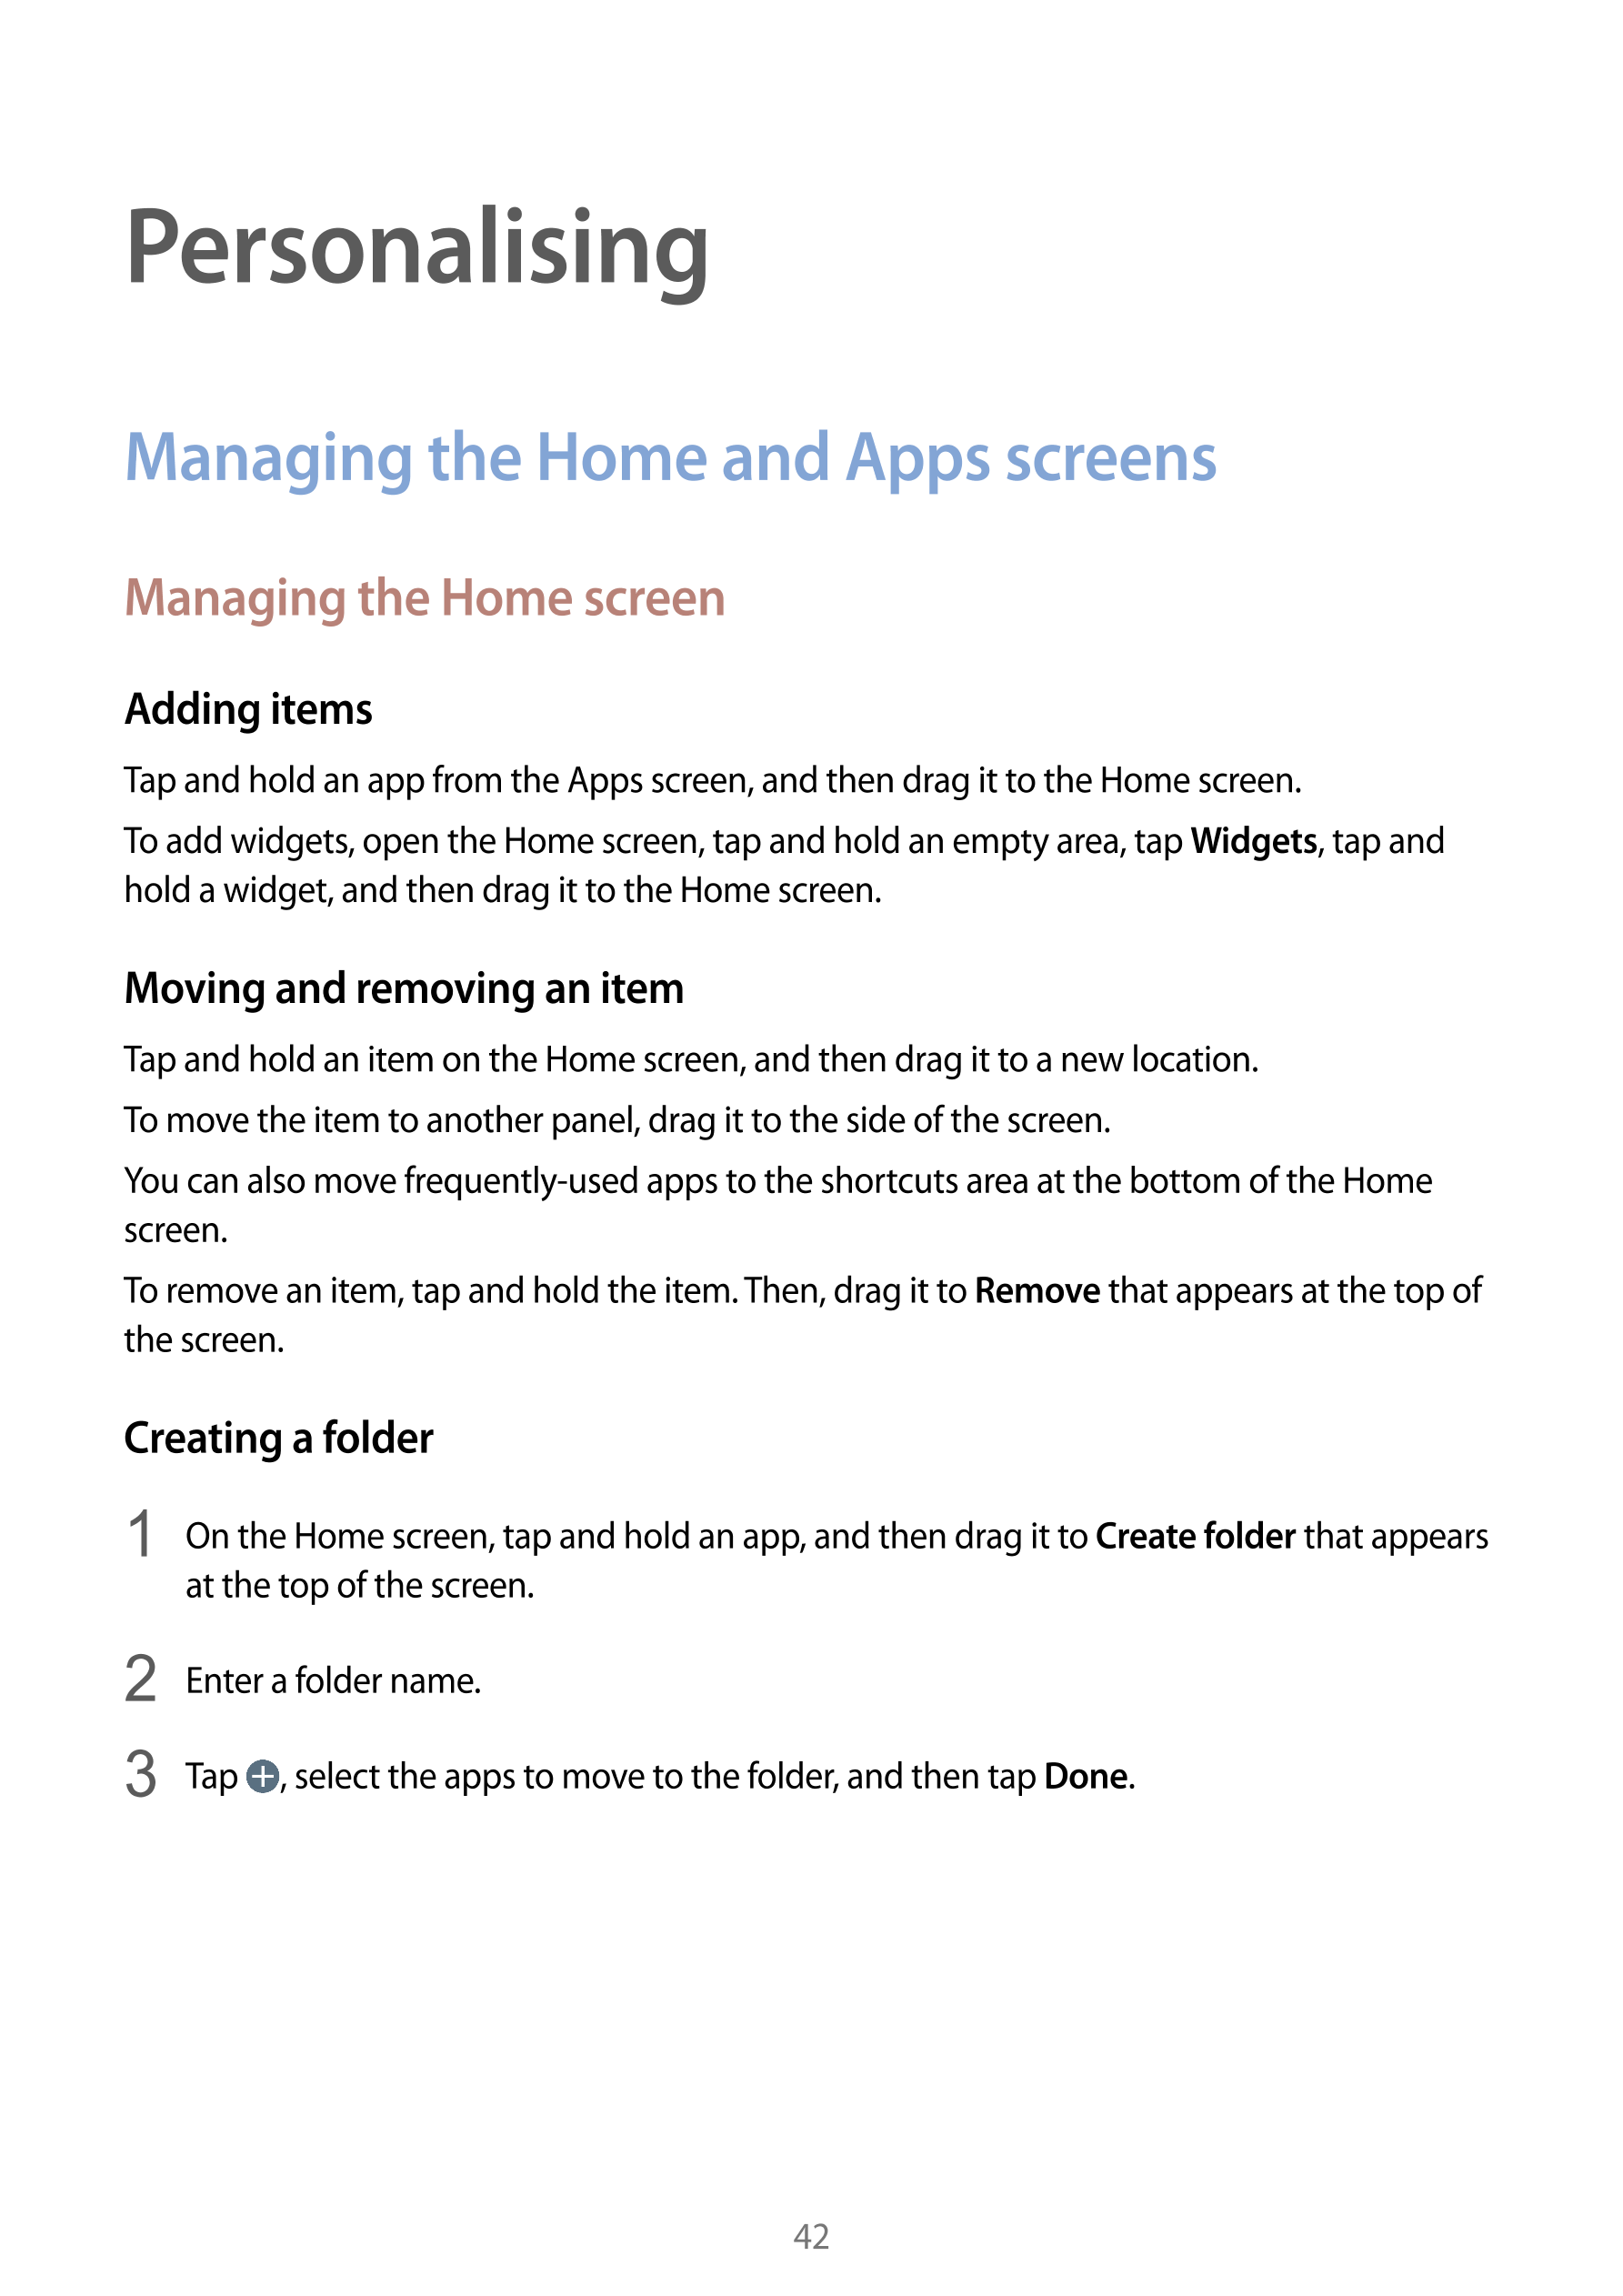 Personalising
Managing the Home and Apps screens
Managing the Home screen
Adding items
Tap and hold an app from the Apps screen,